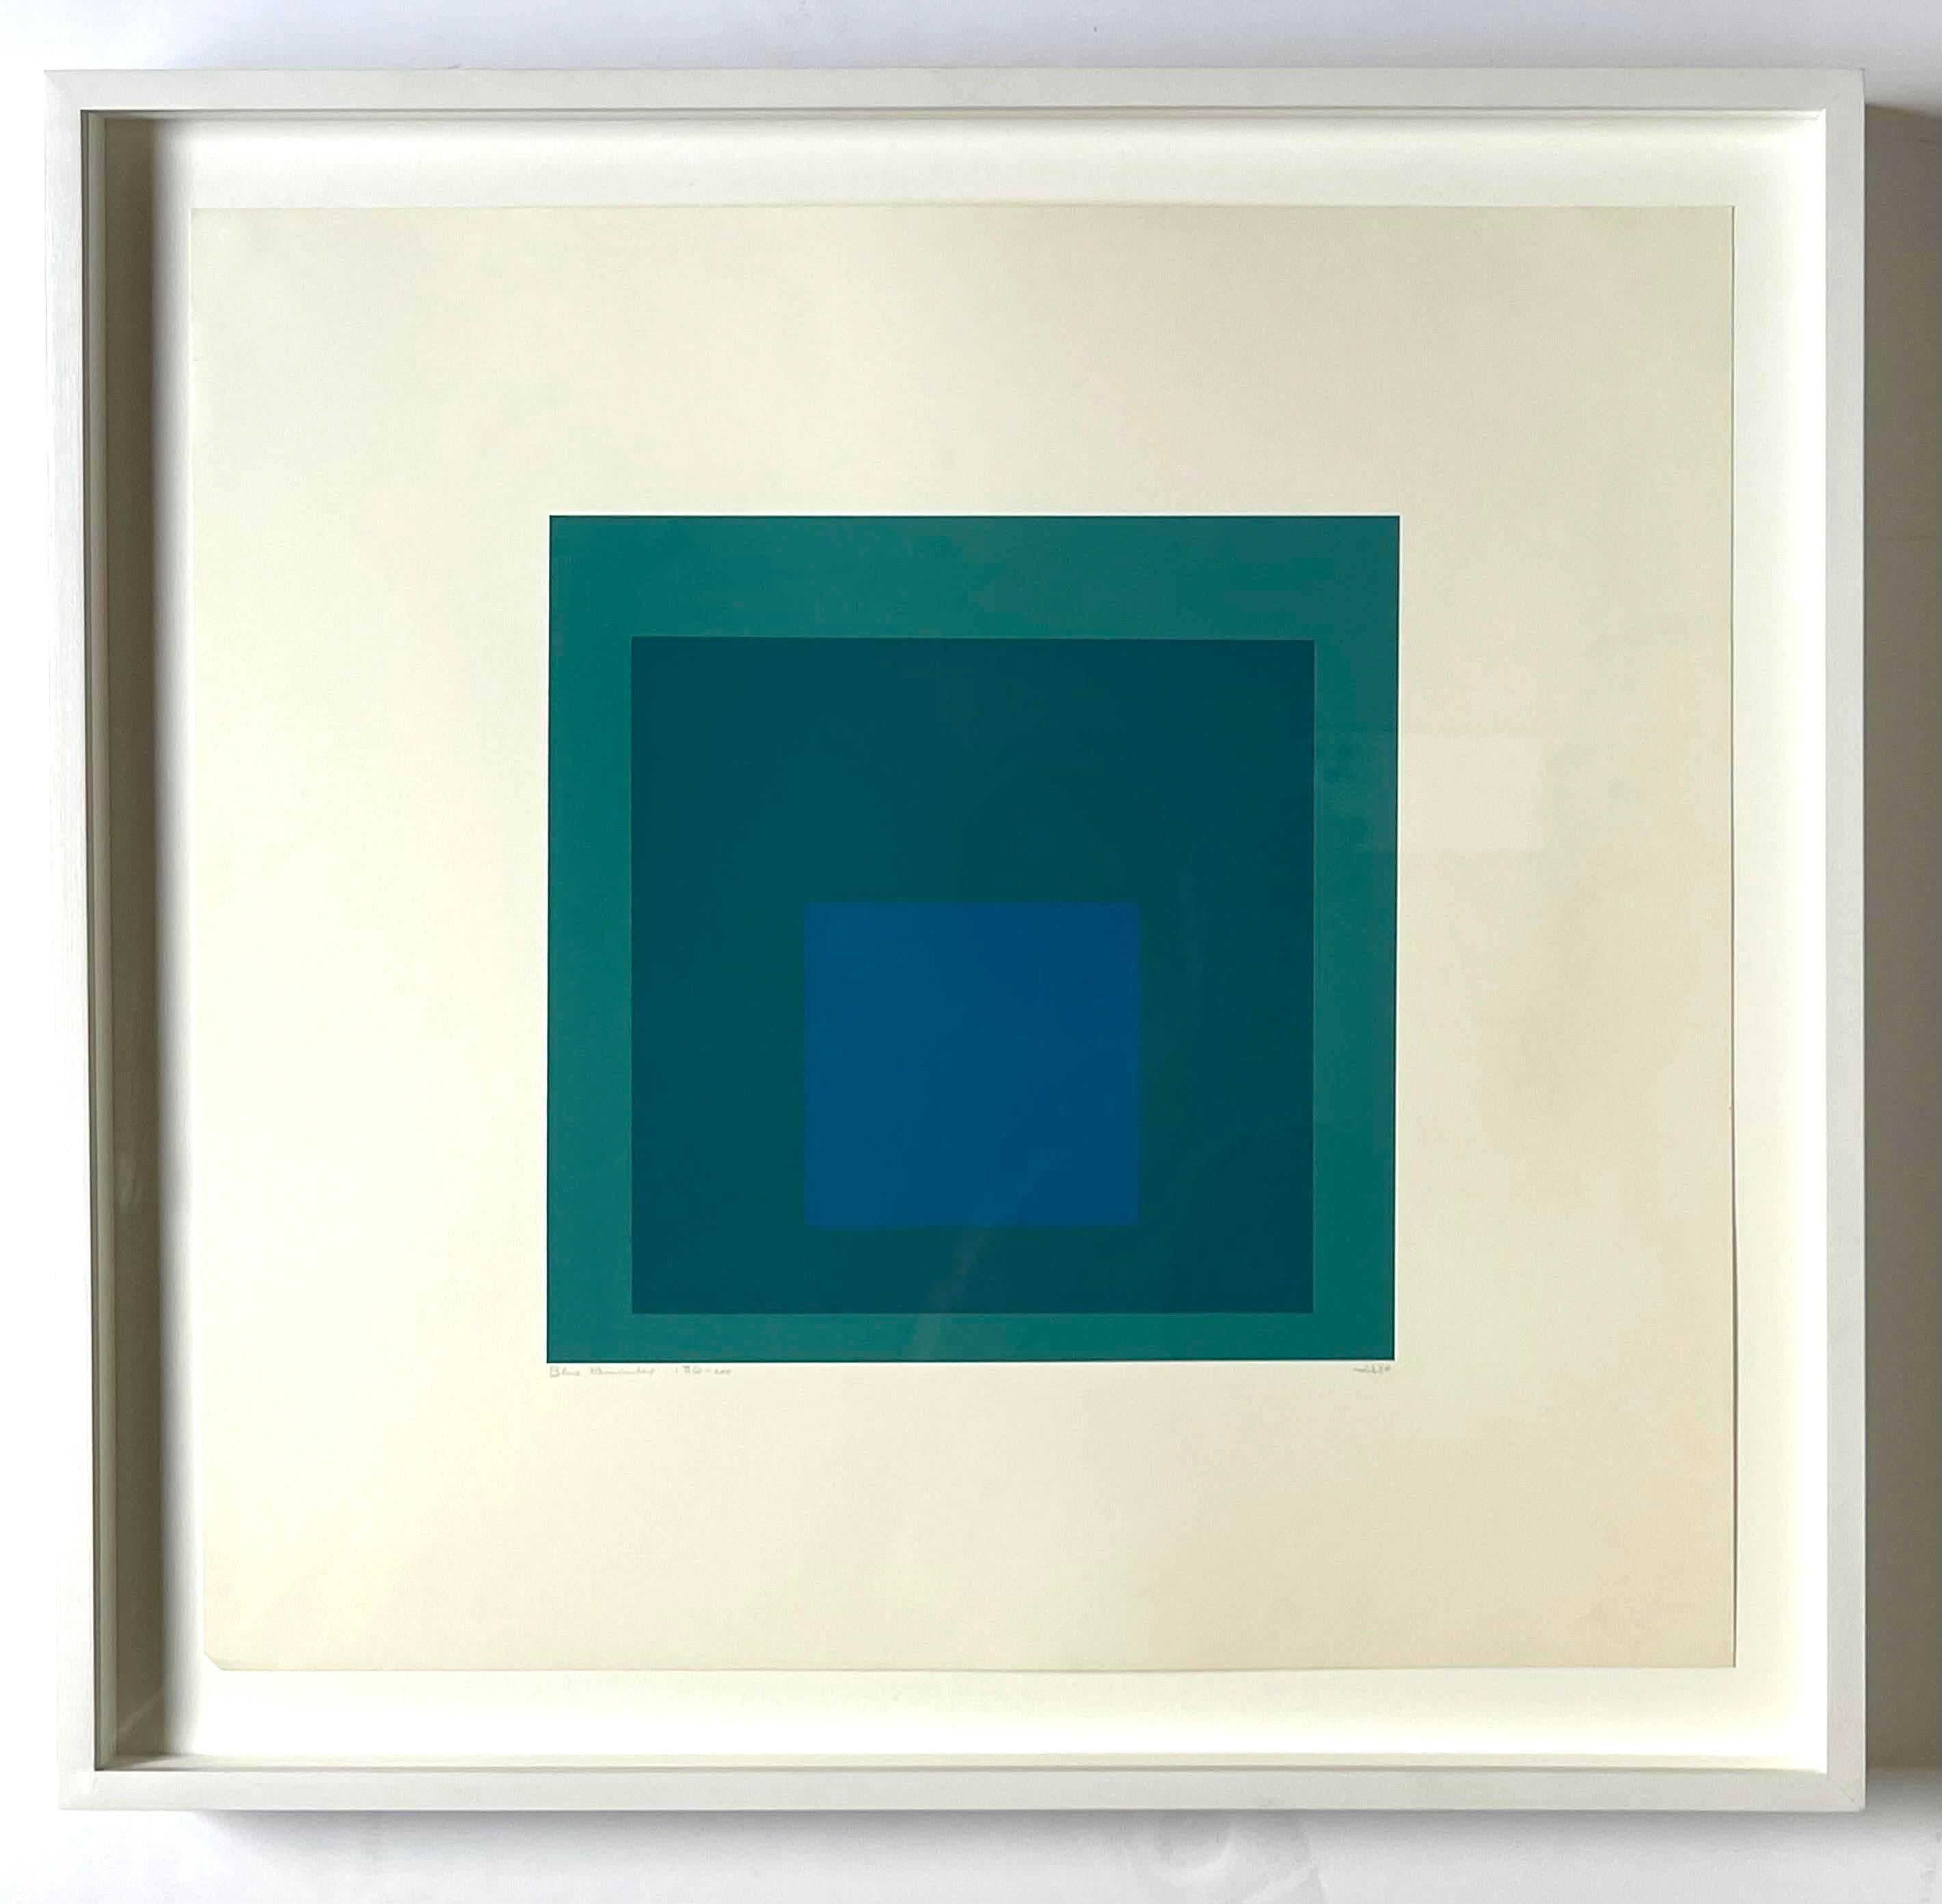 Josef Albers
Blue Reminding, 1966
Silkscreen in colours, on Mohawk Superfine Bristol paper, with full margins
Hand signed, titled, numbered 136/200 and dated in pencil by the artist on the front
Bibliography:
Catalogue Raisonne Reference: Danilowitz